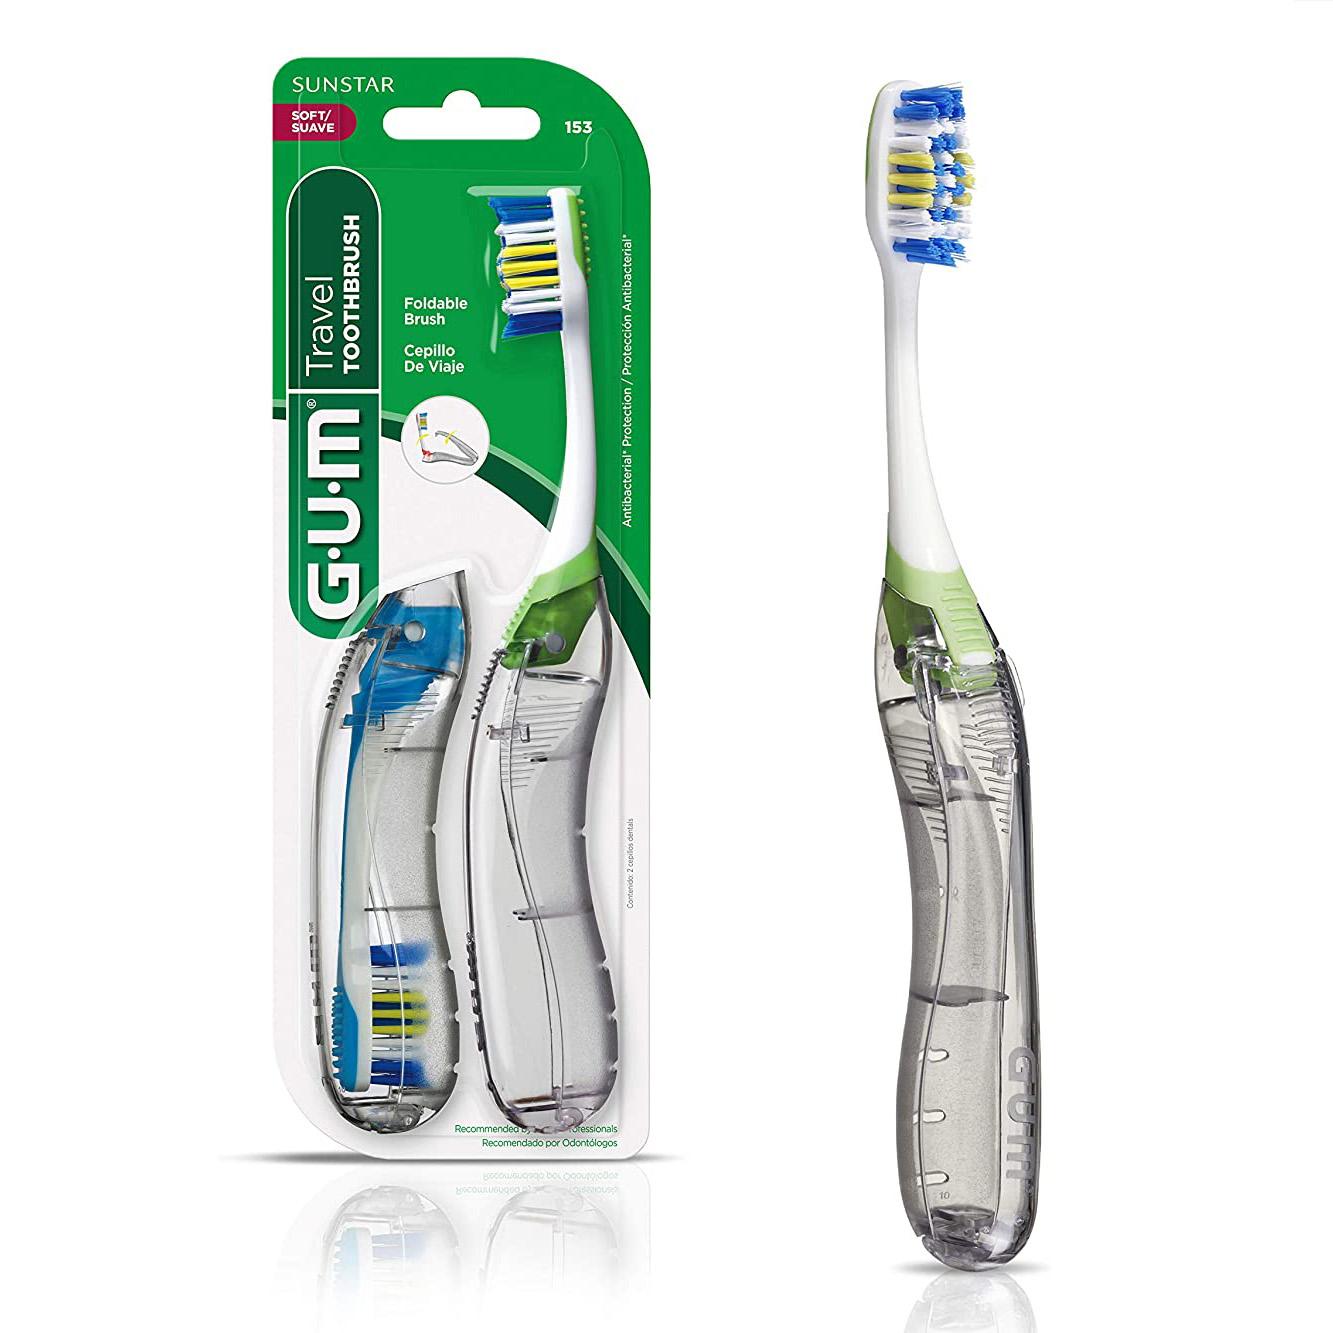 2 GUM Travel Toothbrush with Folding Handle for $1.79 Shipped